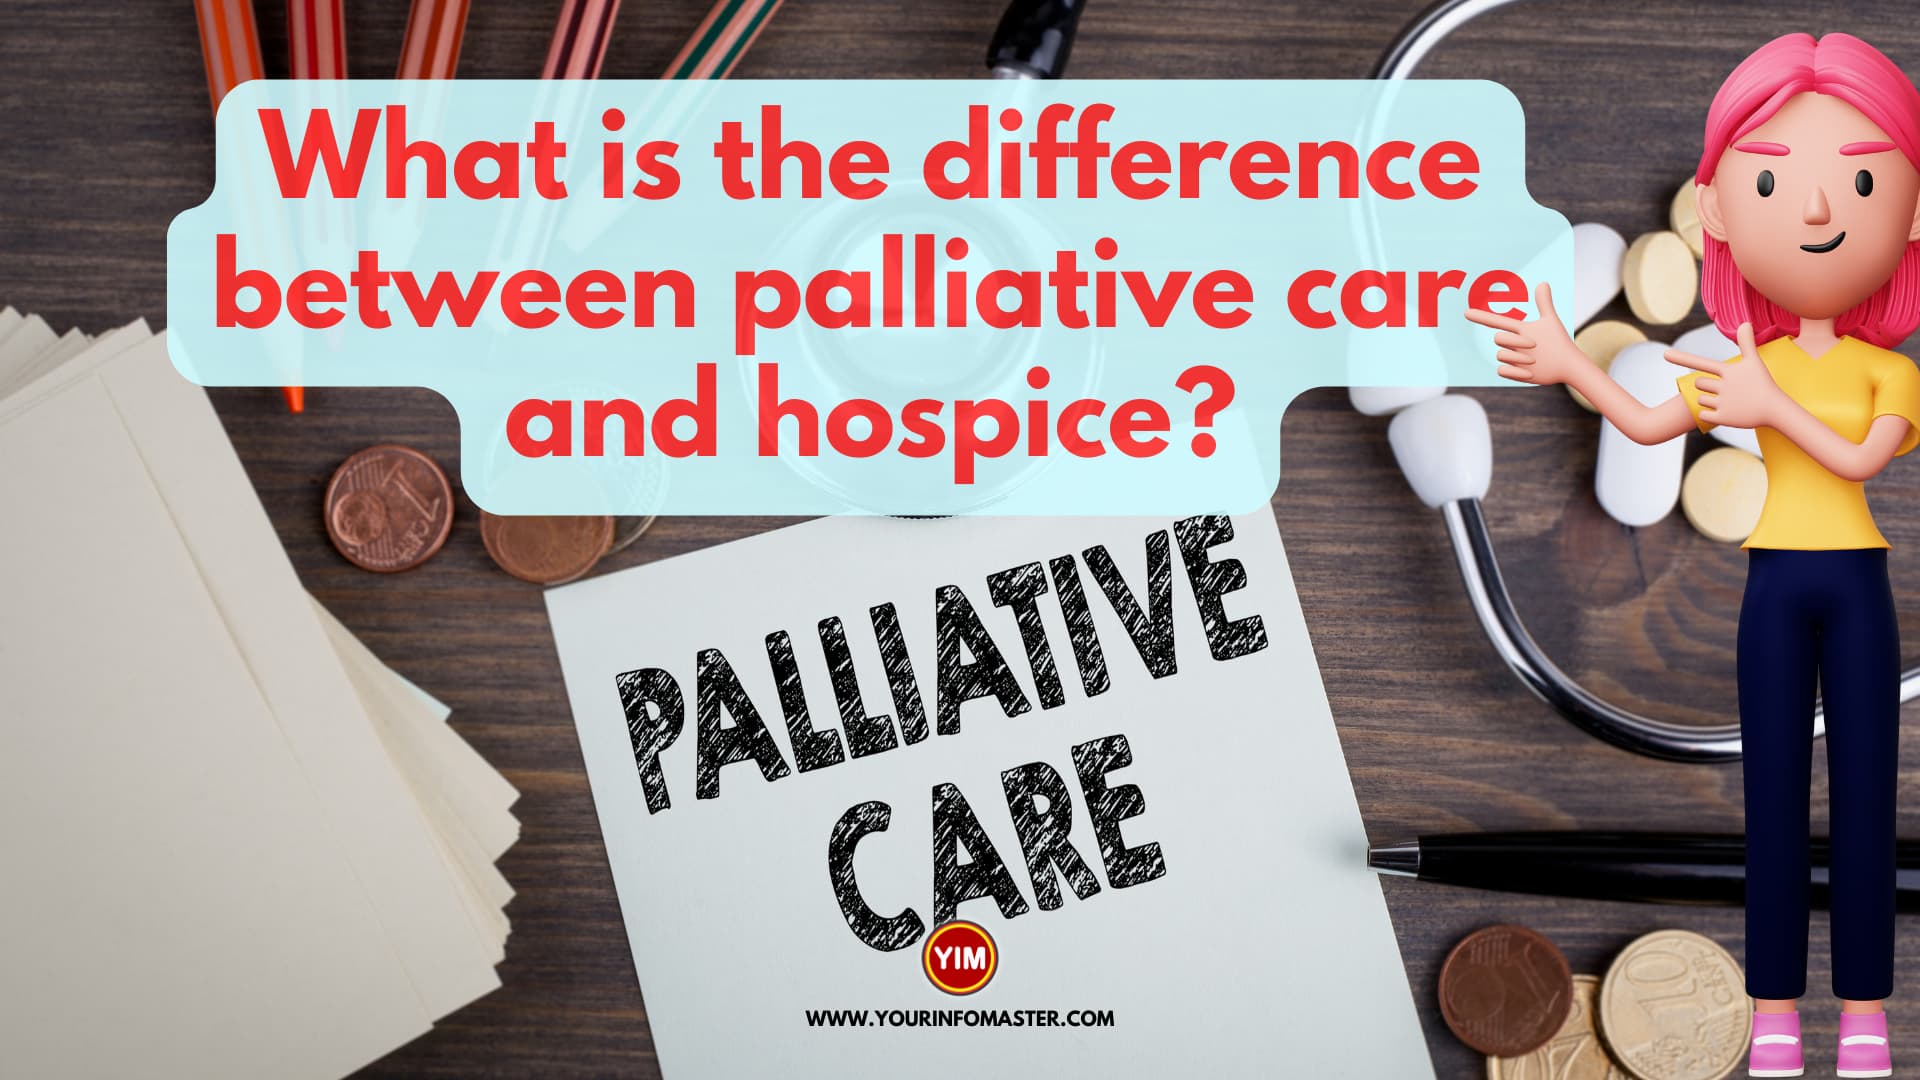 What is the difference between palliative care and hospice